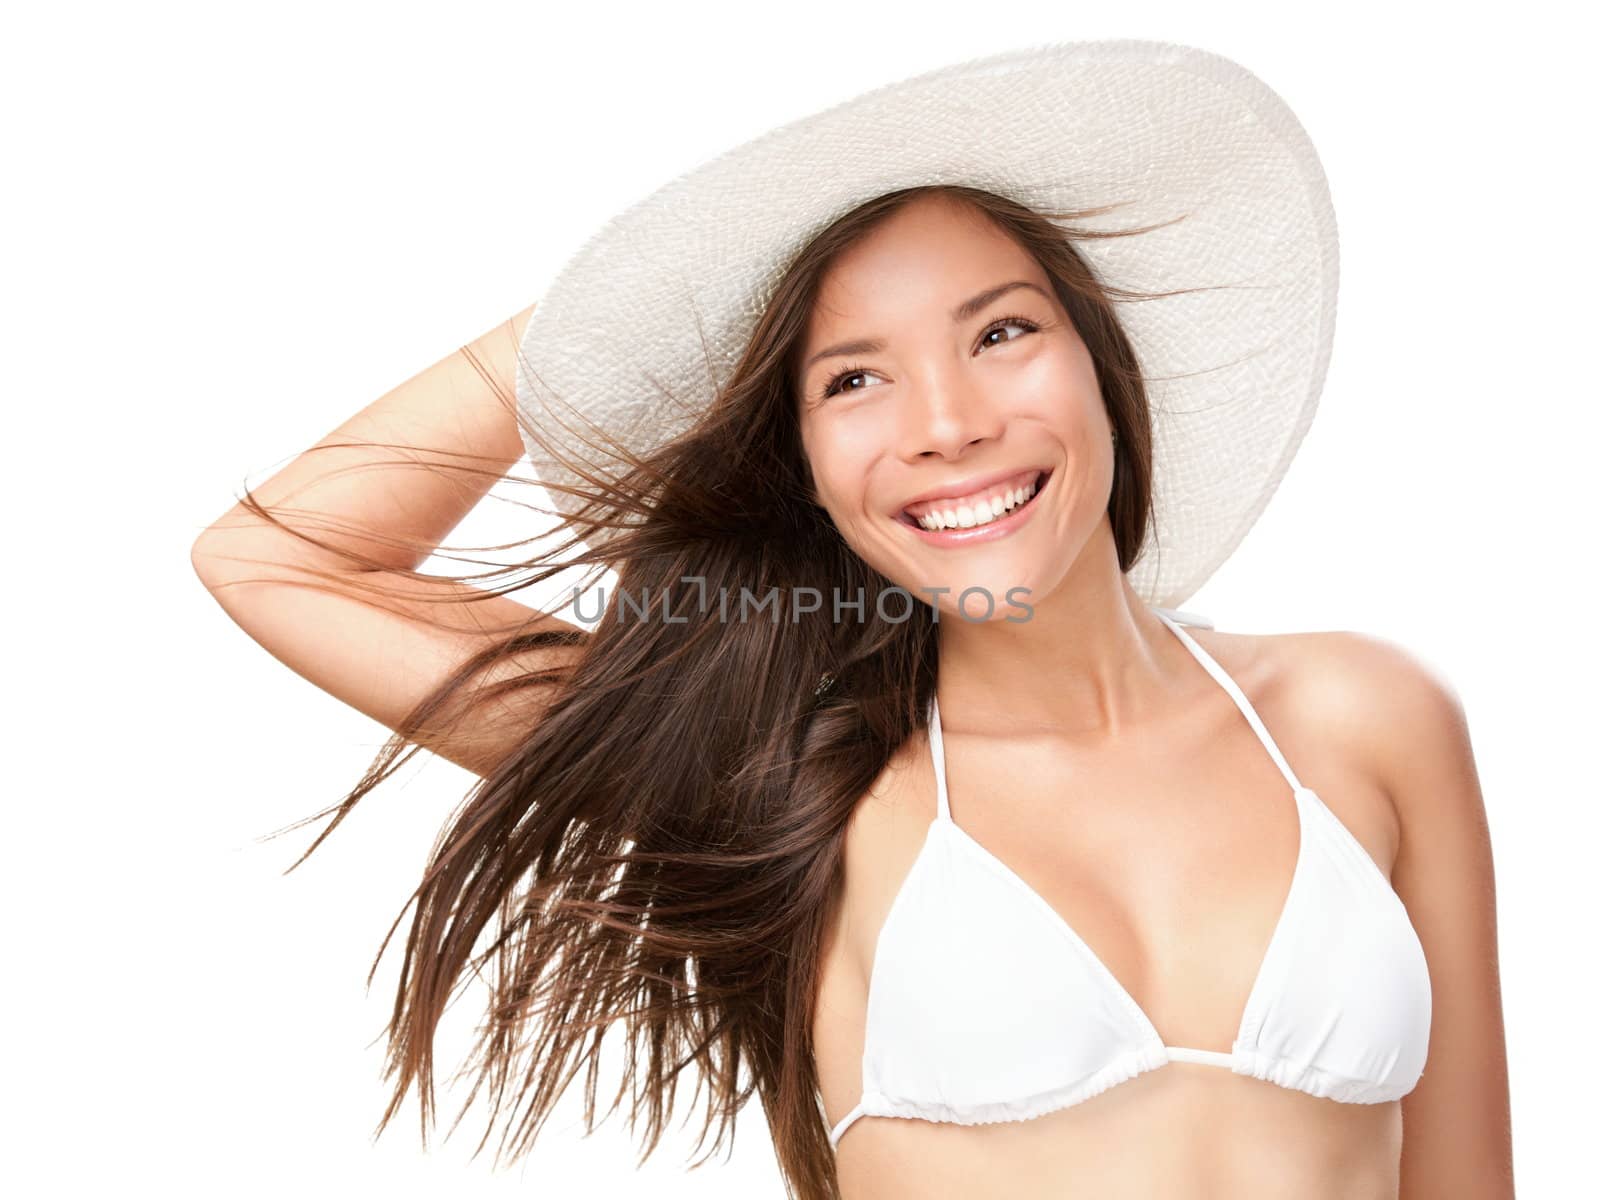 Summer bikini girl isolated. Portrait of young summer woman smiling in white bikini and beach hat. Fresh and pretty Mixed race Asian Caucasian model isolated on white background.